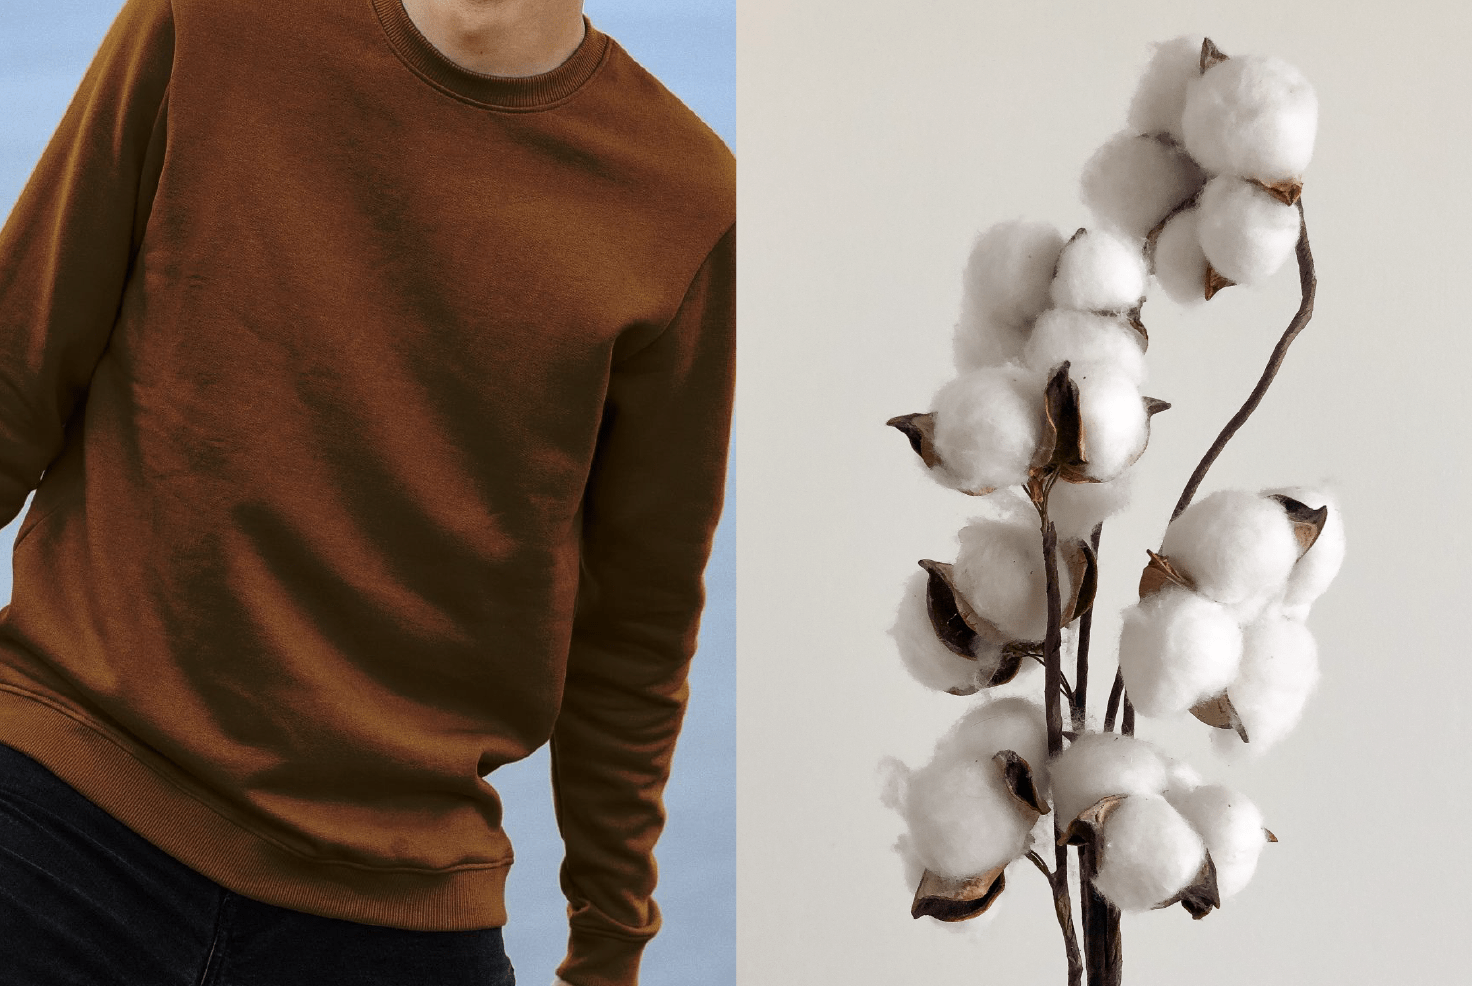 Why you should wear cotton clothing